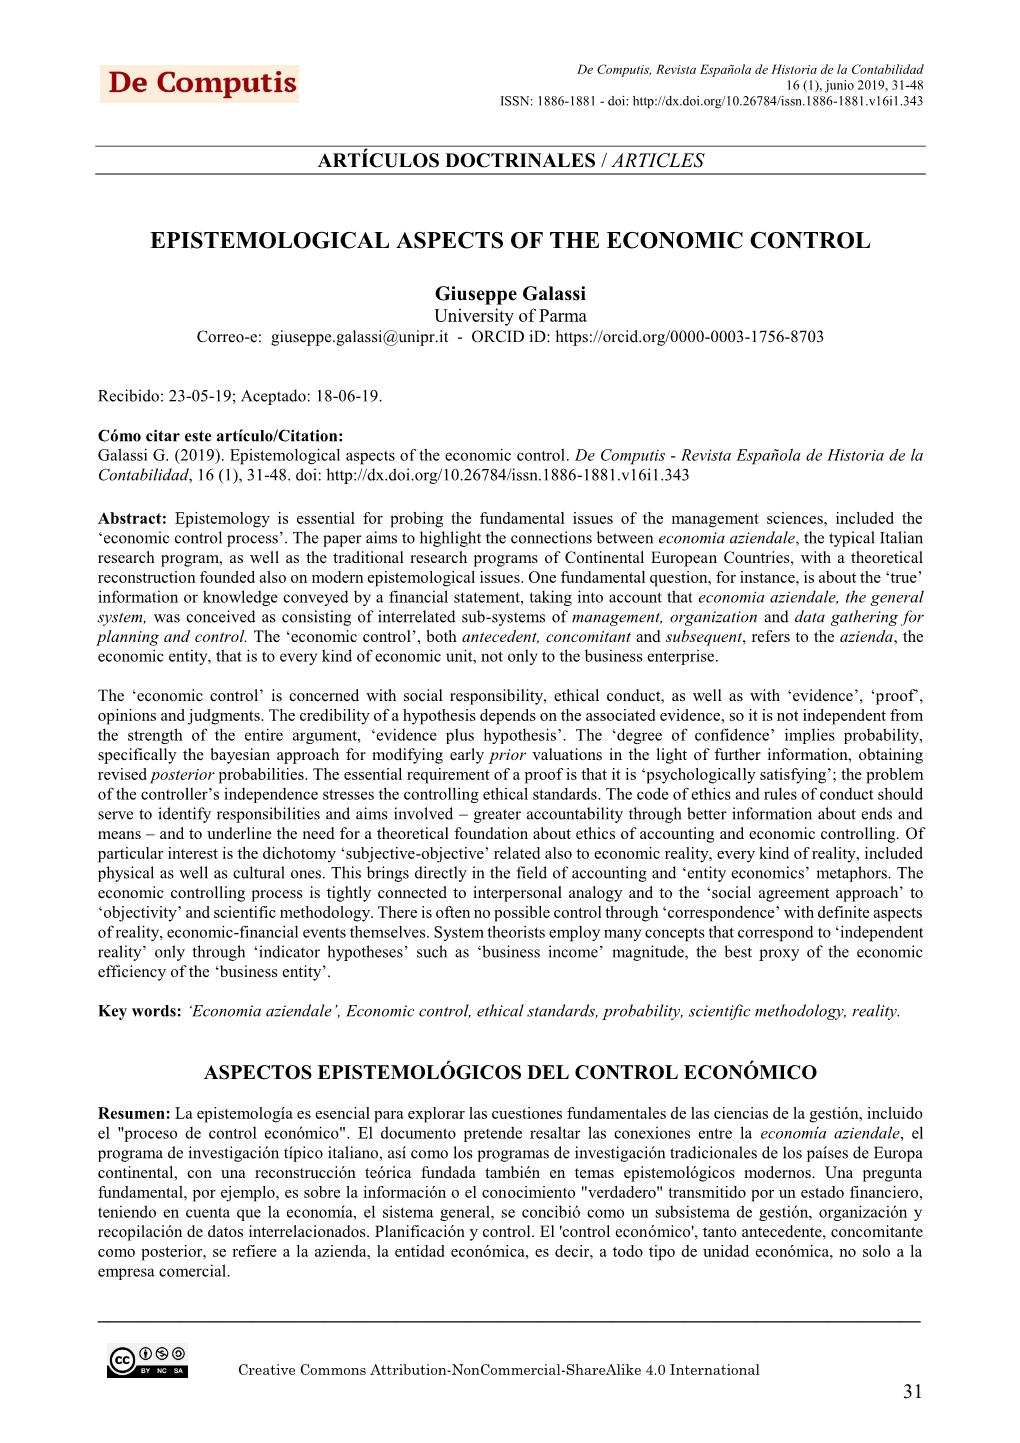 Epistemological Aspects of the Economic Control